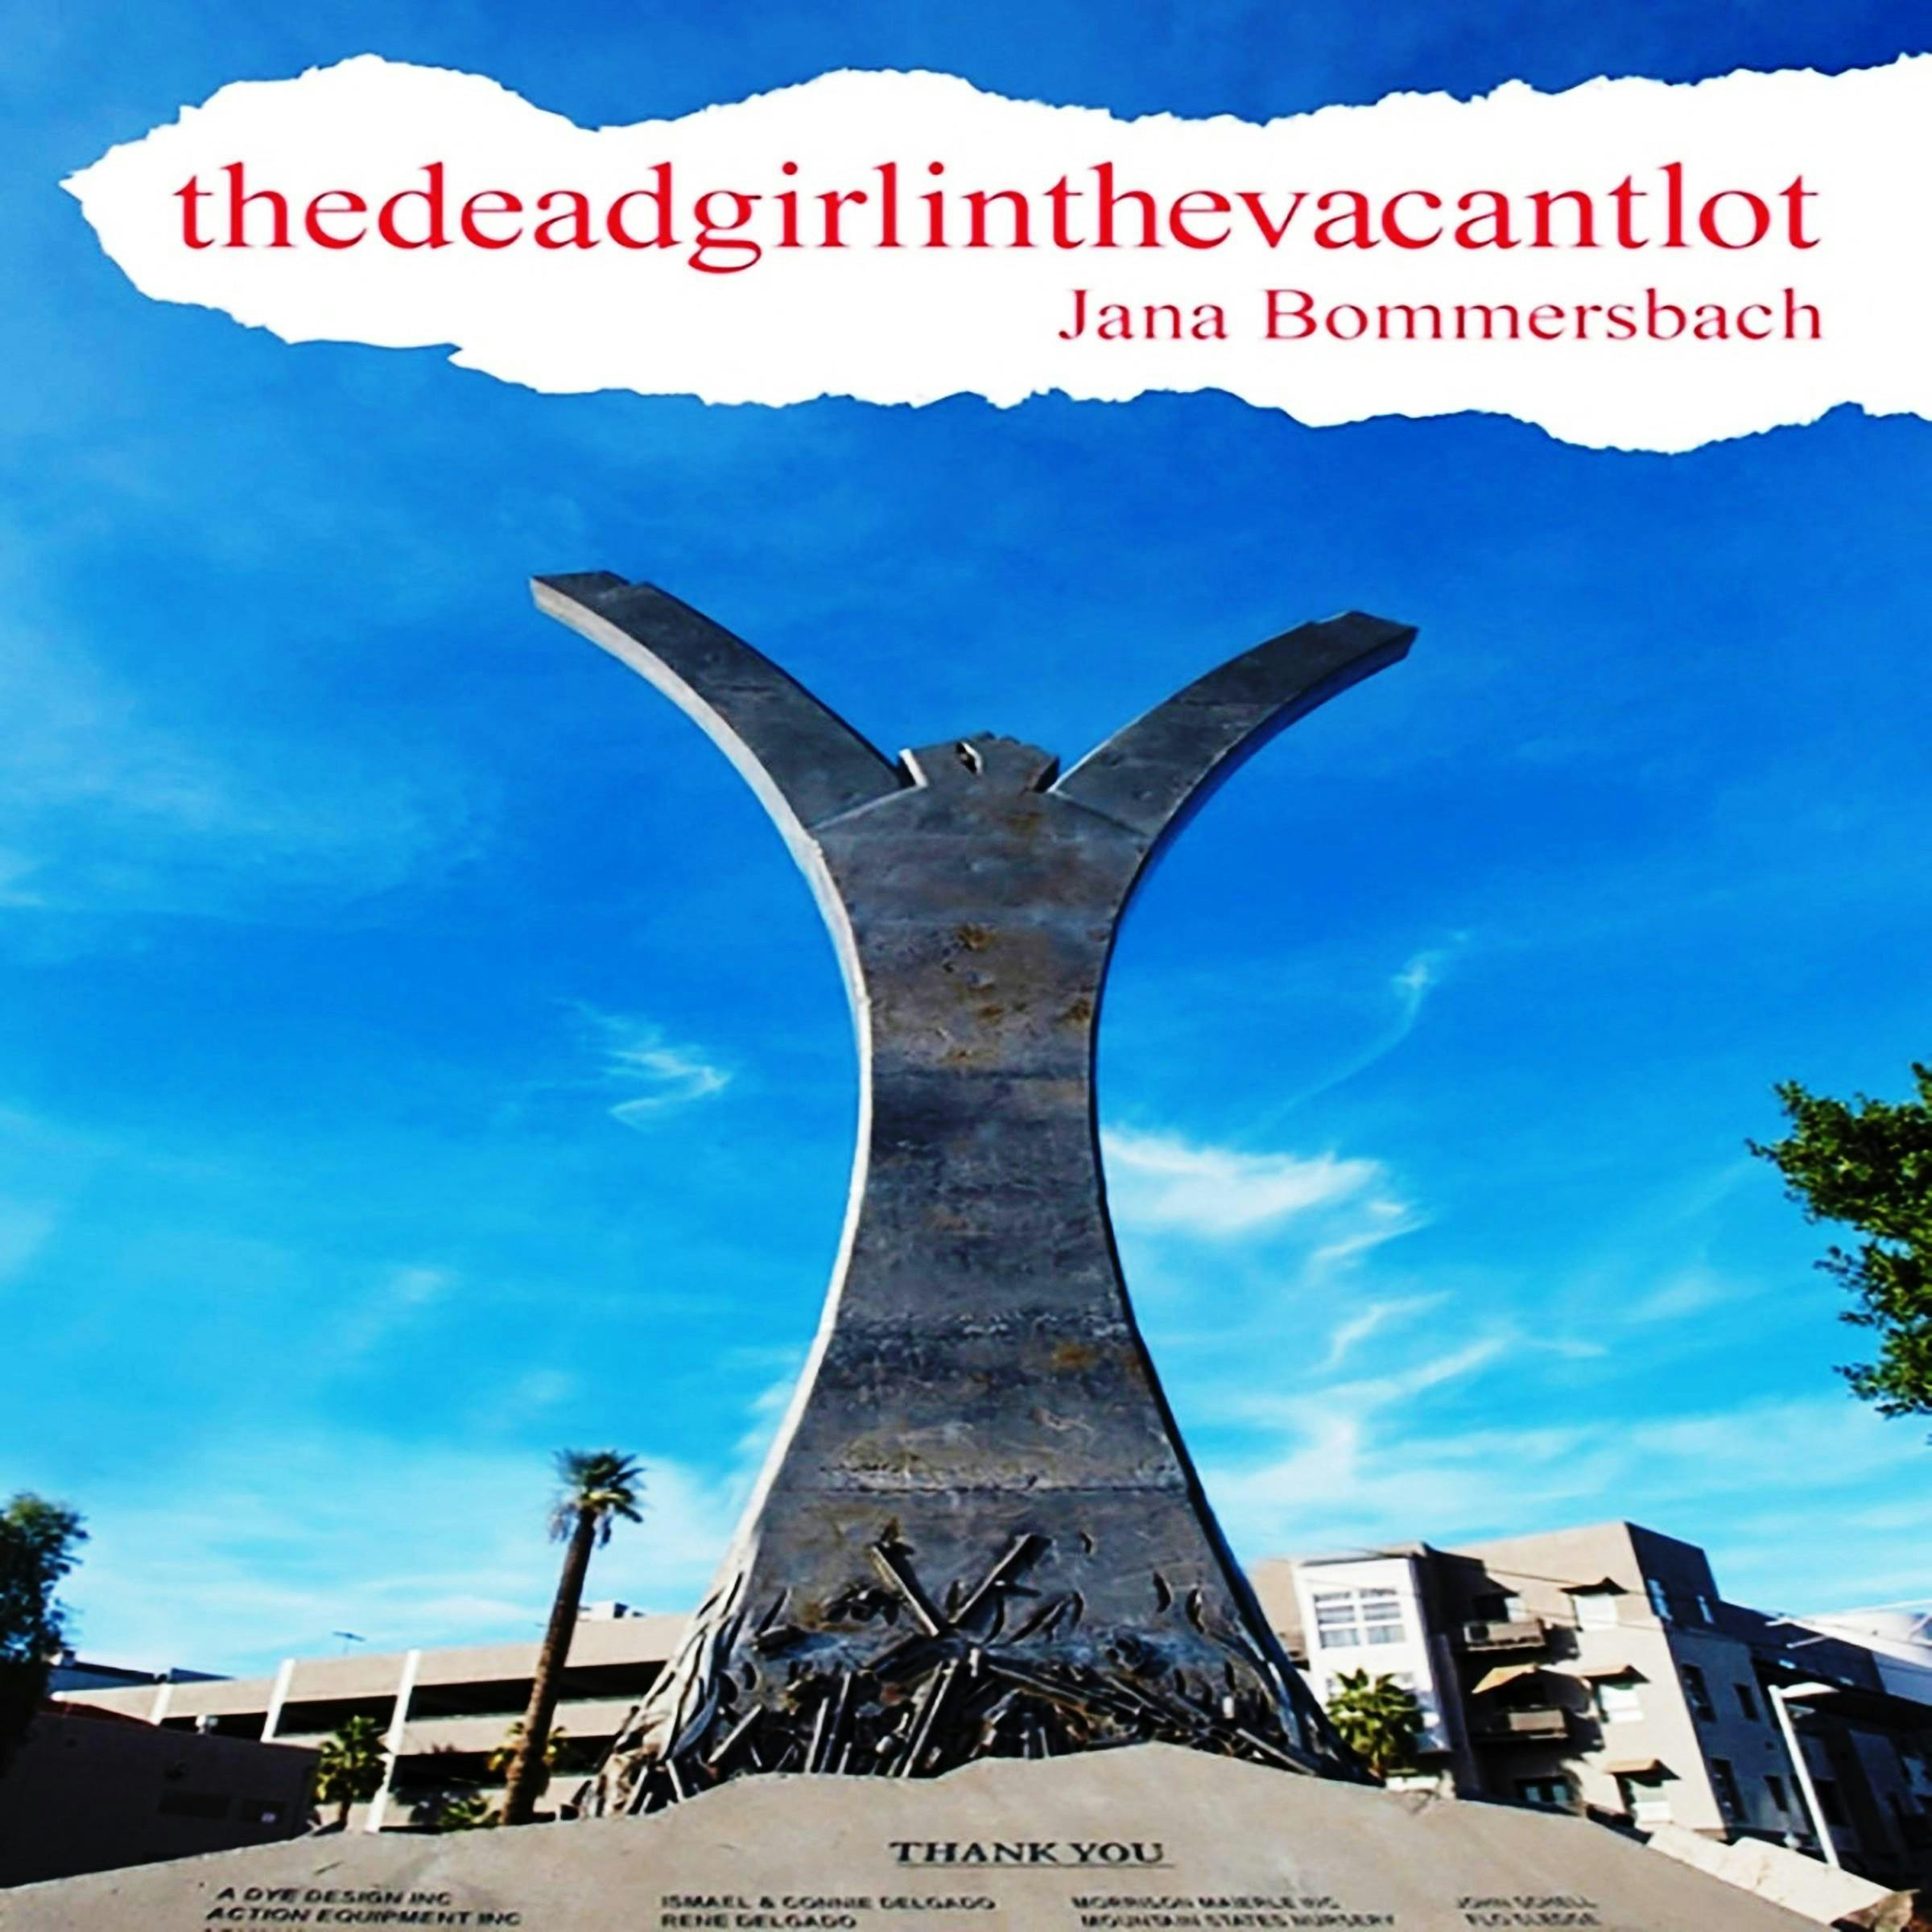 thedeadgirlinthevacantlot - Jana Bommersbach